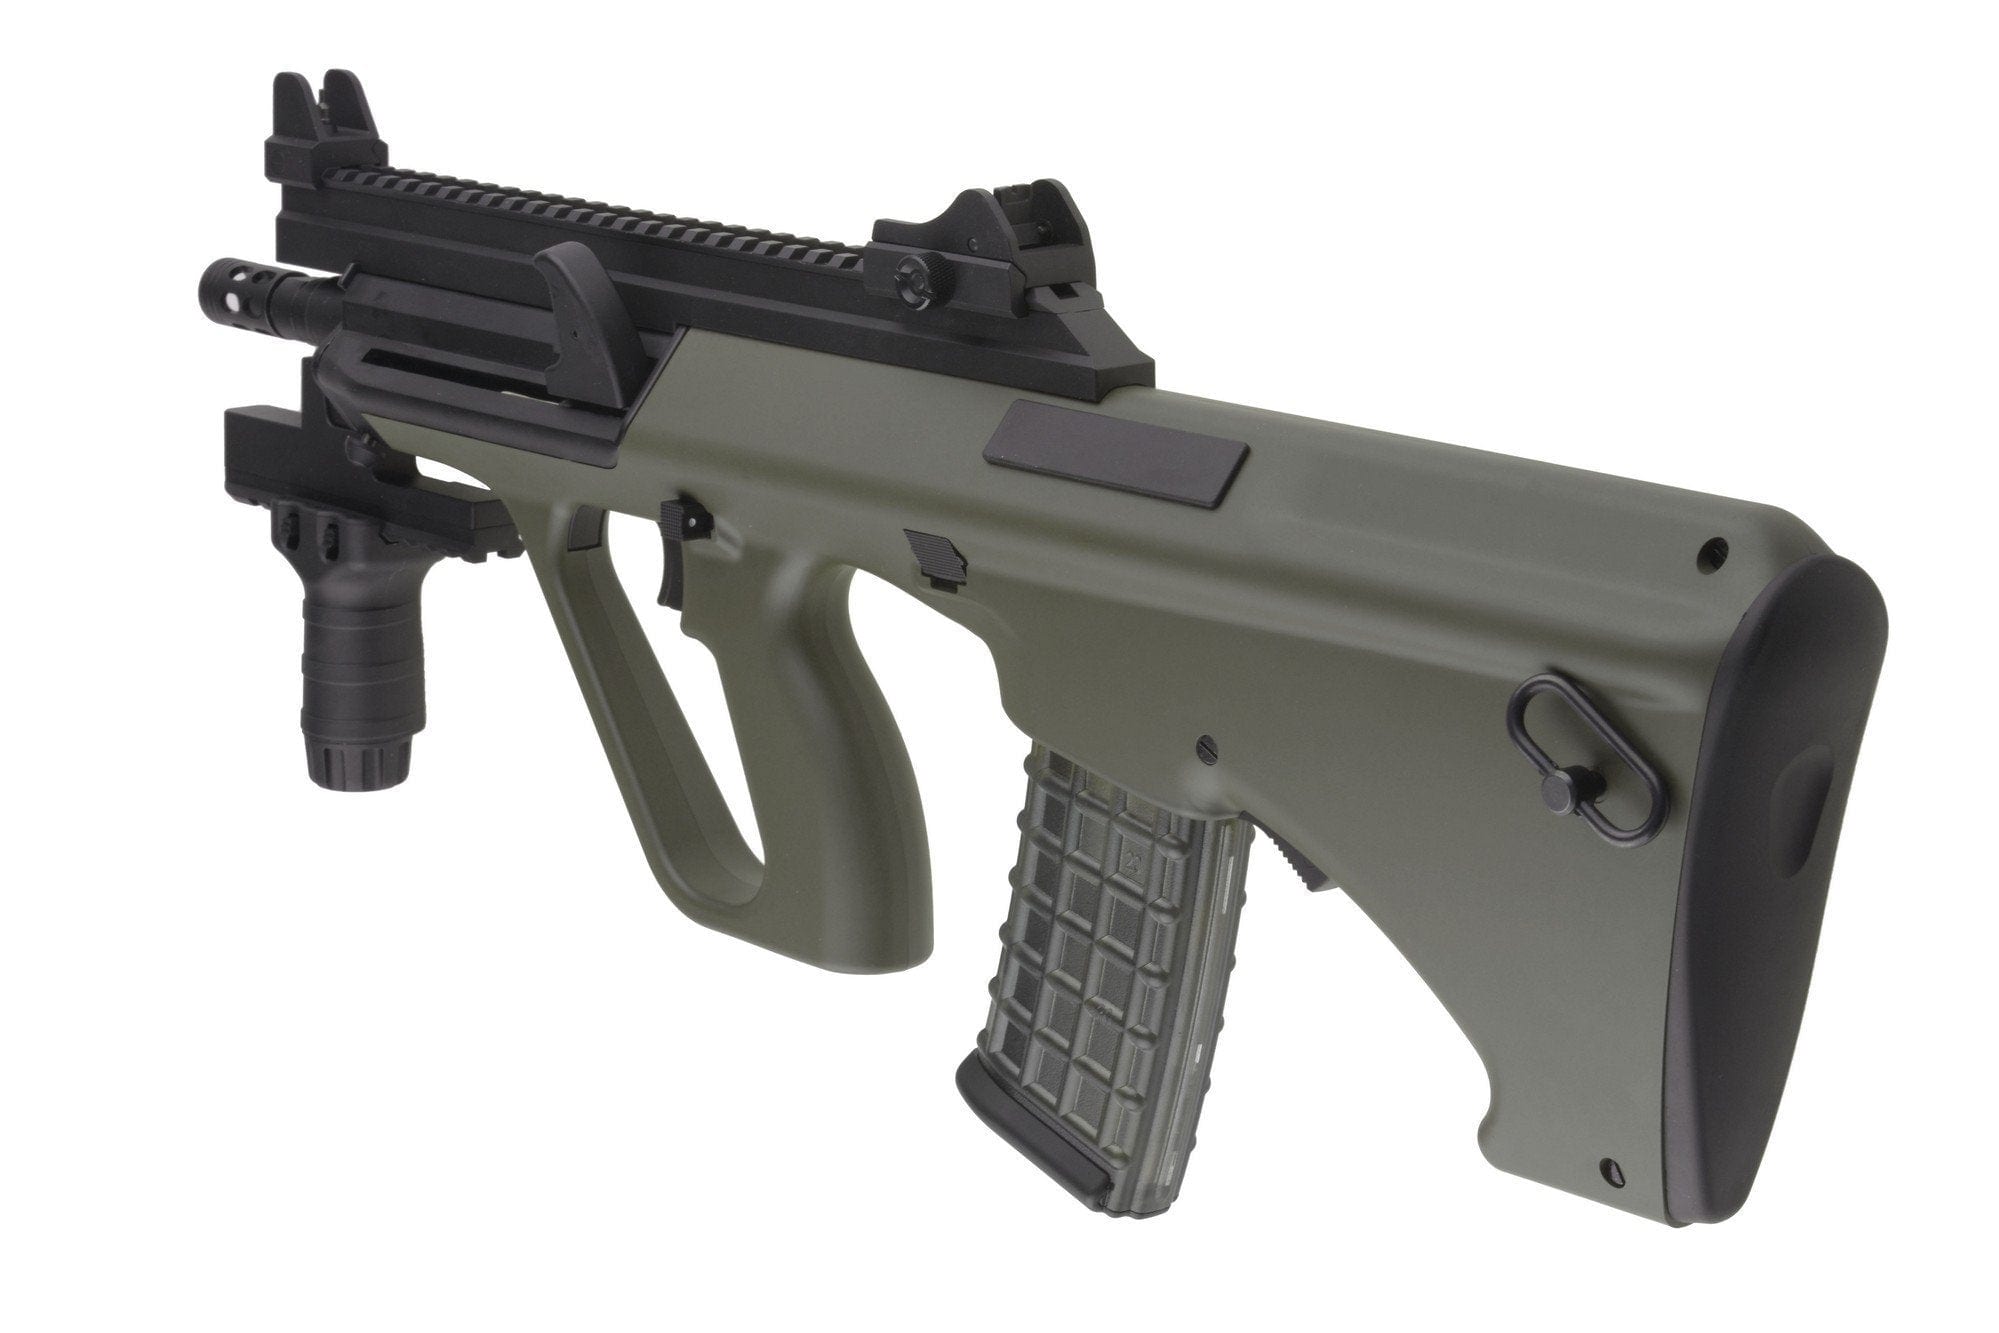 AUG SW-020T Compact - Olive Drab